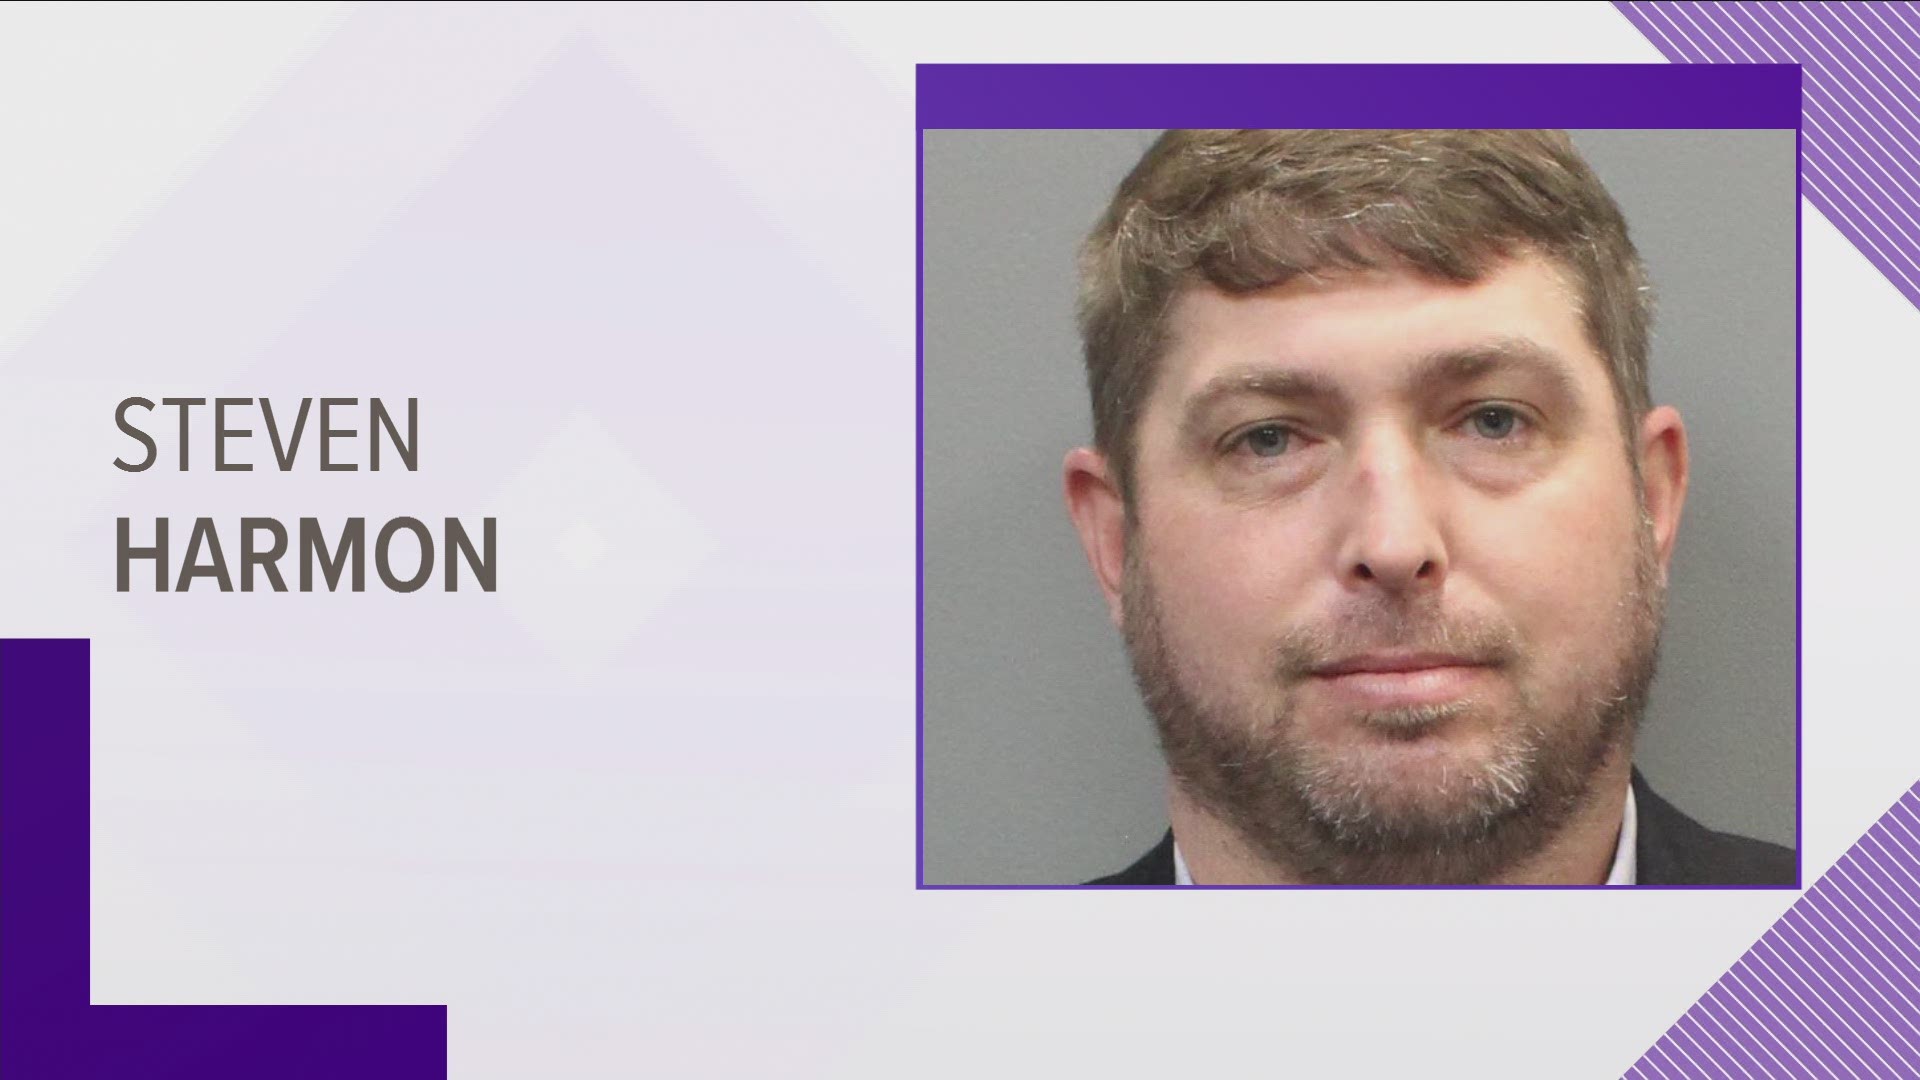 A former Knox County court clerk will spend a year on probation after he stole thousands of dollars on the job in 2019.